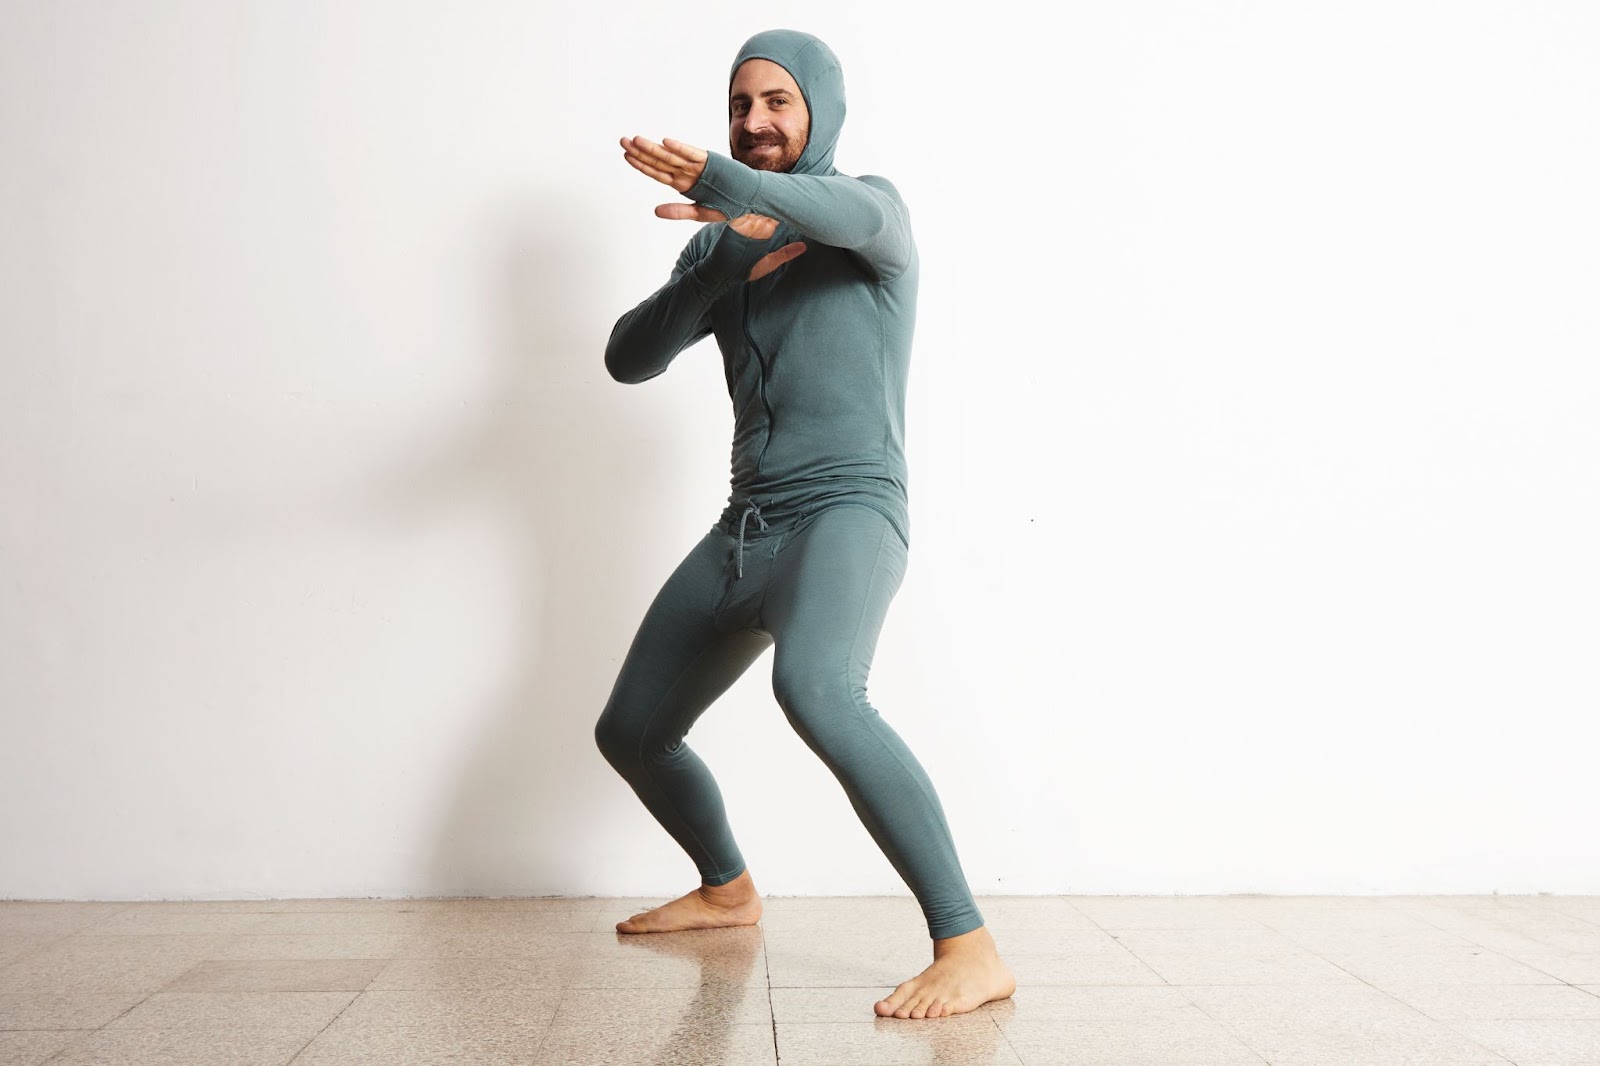 happy-smiling-bearded-fitted-male-wearing-snowboarding-thermal-baselayer-suite-from-merino-wool-and-acts-like-a-ninja-in-defend-position-isolated-on-white.jpg